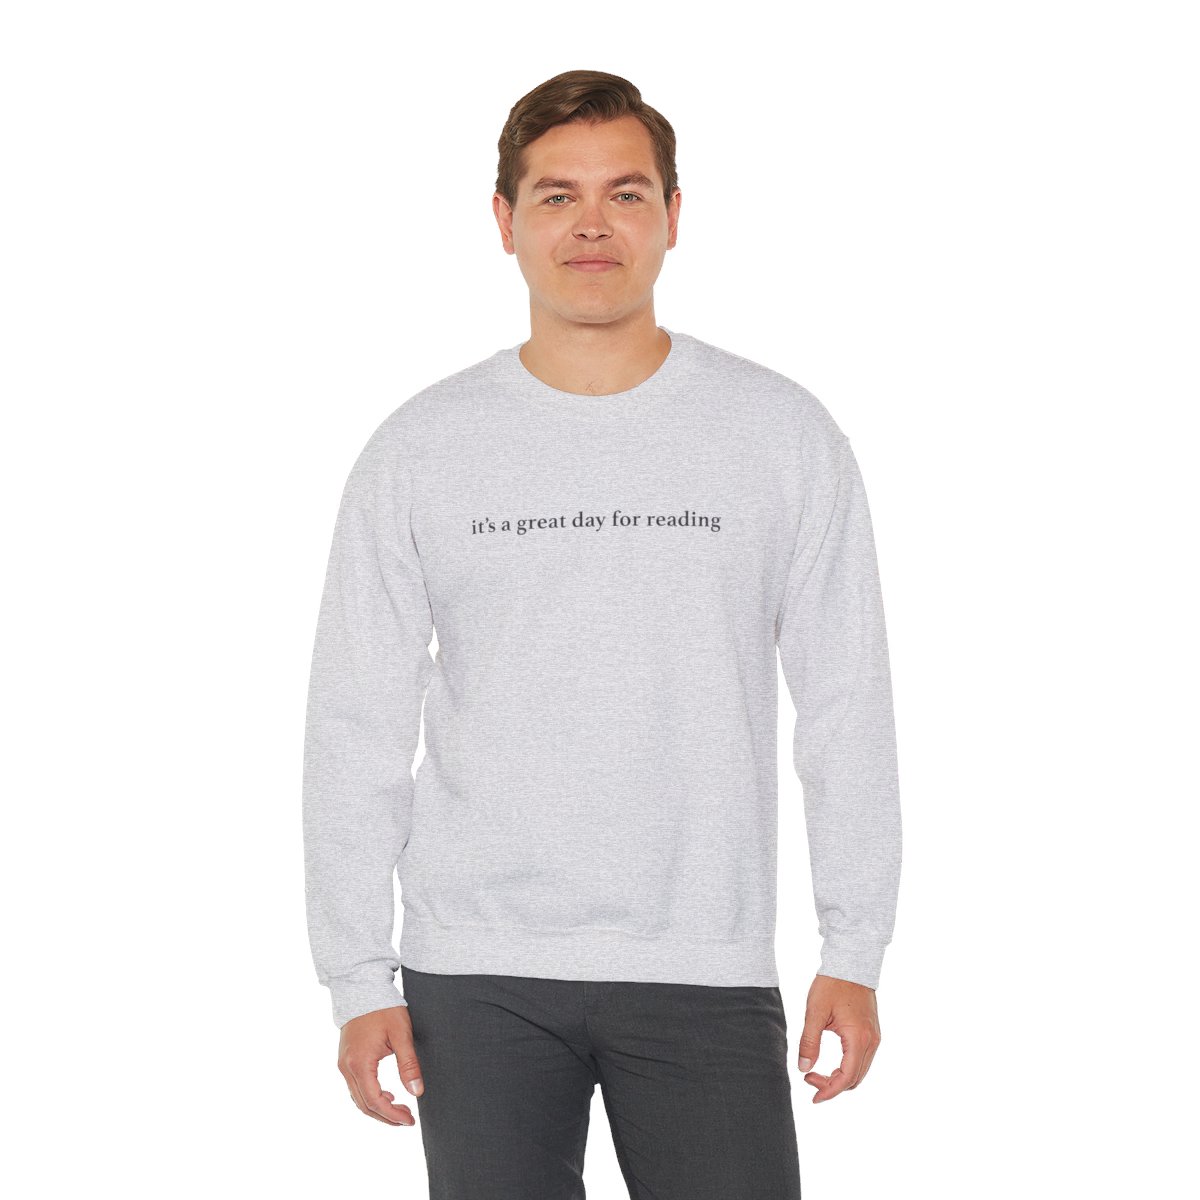 It's a Great Day for Reading Crewneck Sweatshirt for Readers, BookTokers, Book Influencers, Bookstagrammers product thumbnail image